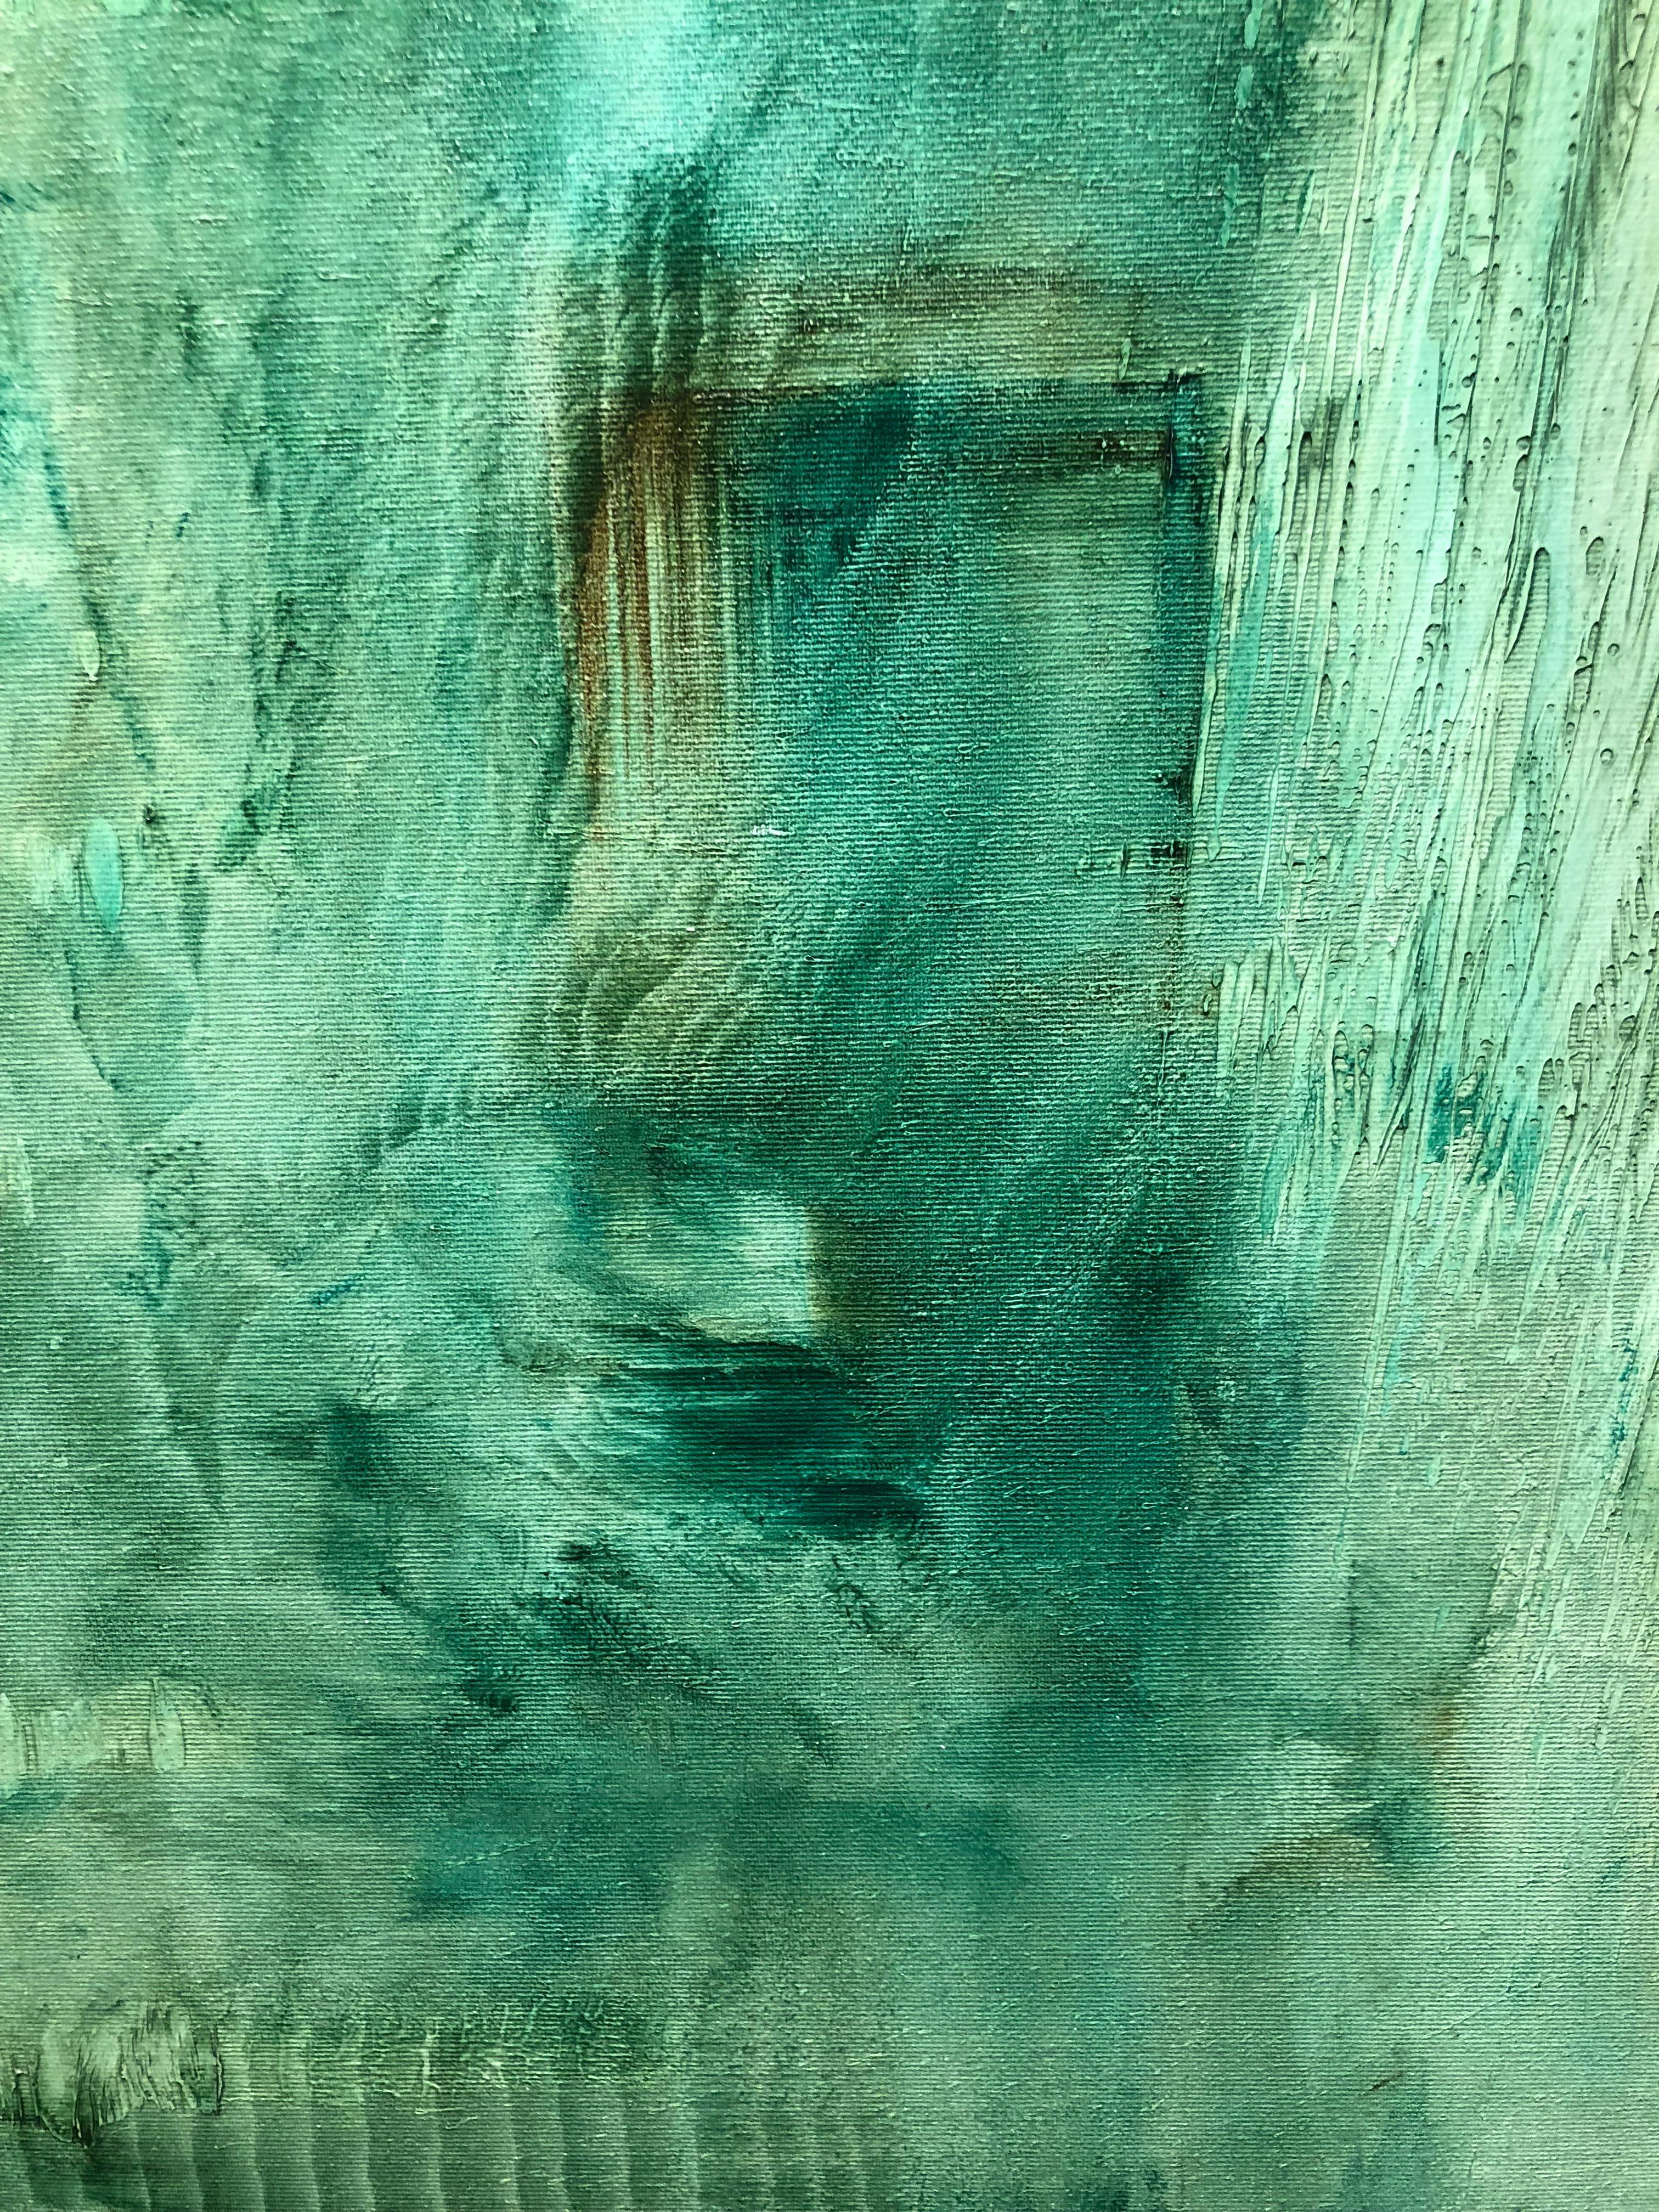 3Crystalking - Abstract painting on canvas, mixed media oil portrait in green. im Angebot 1